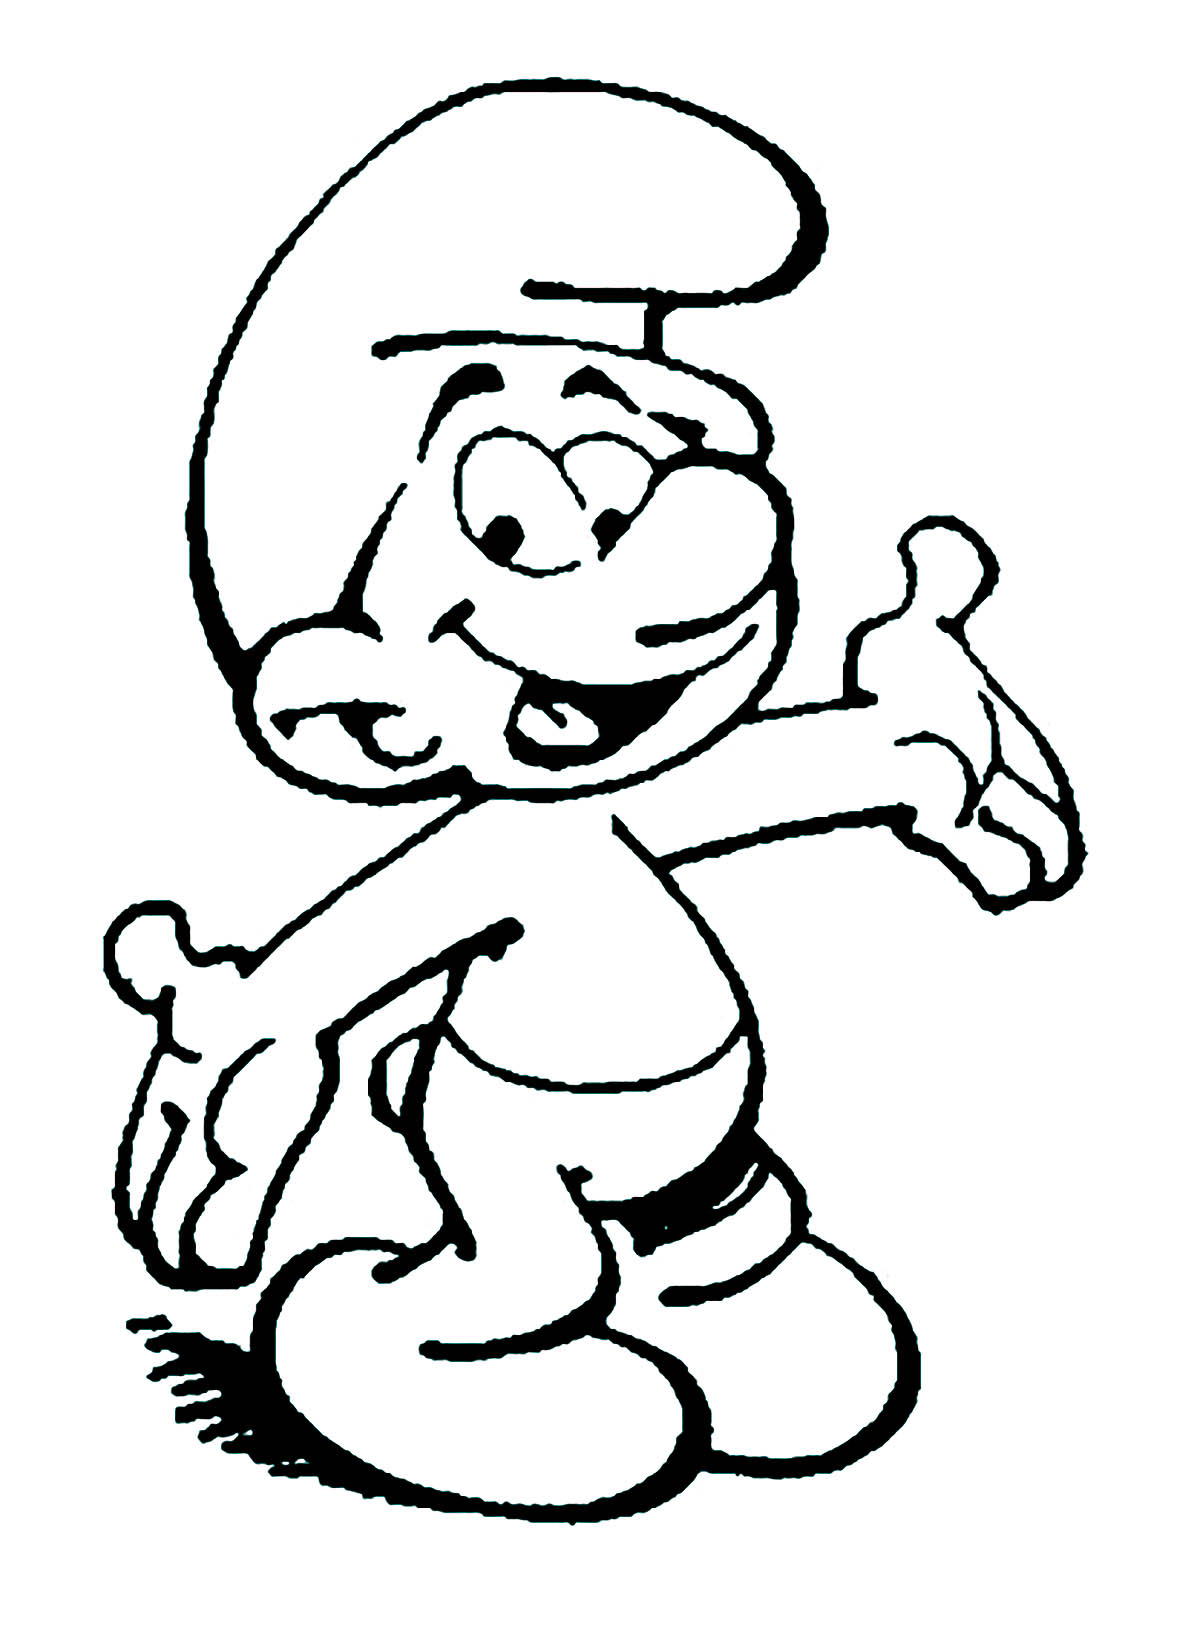 This Smurfs reaches out to invite you to color it!